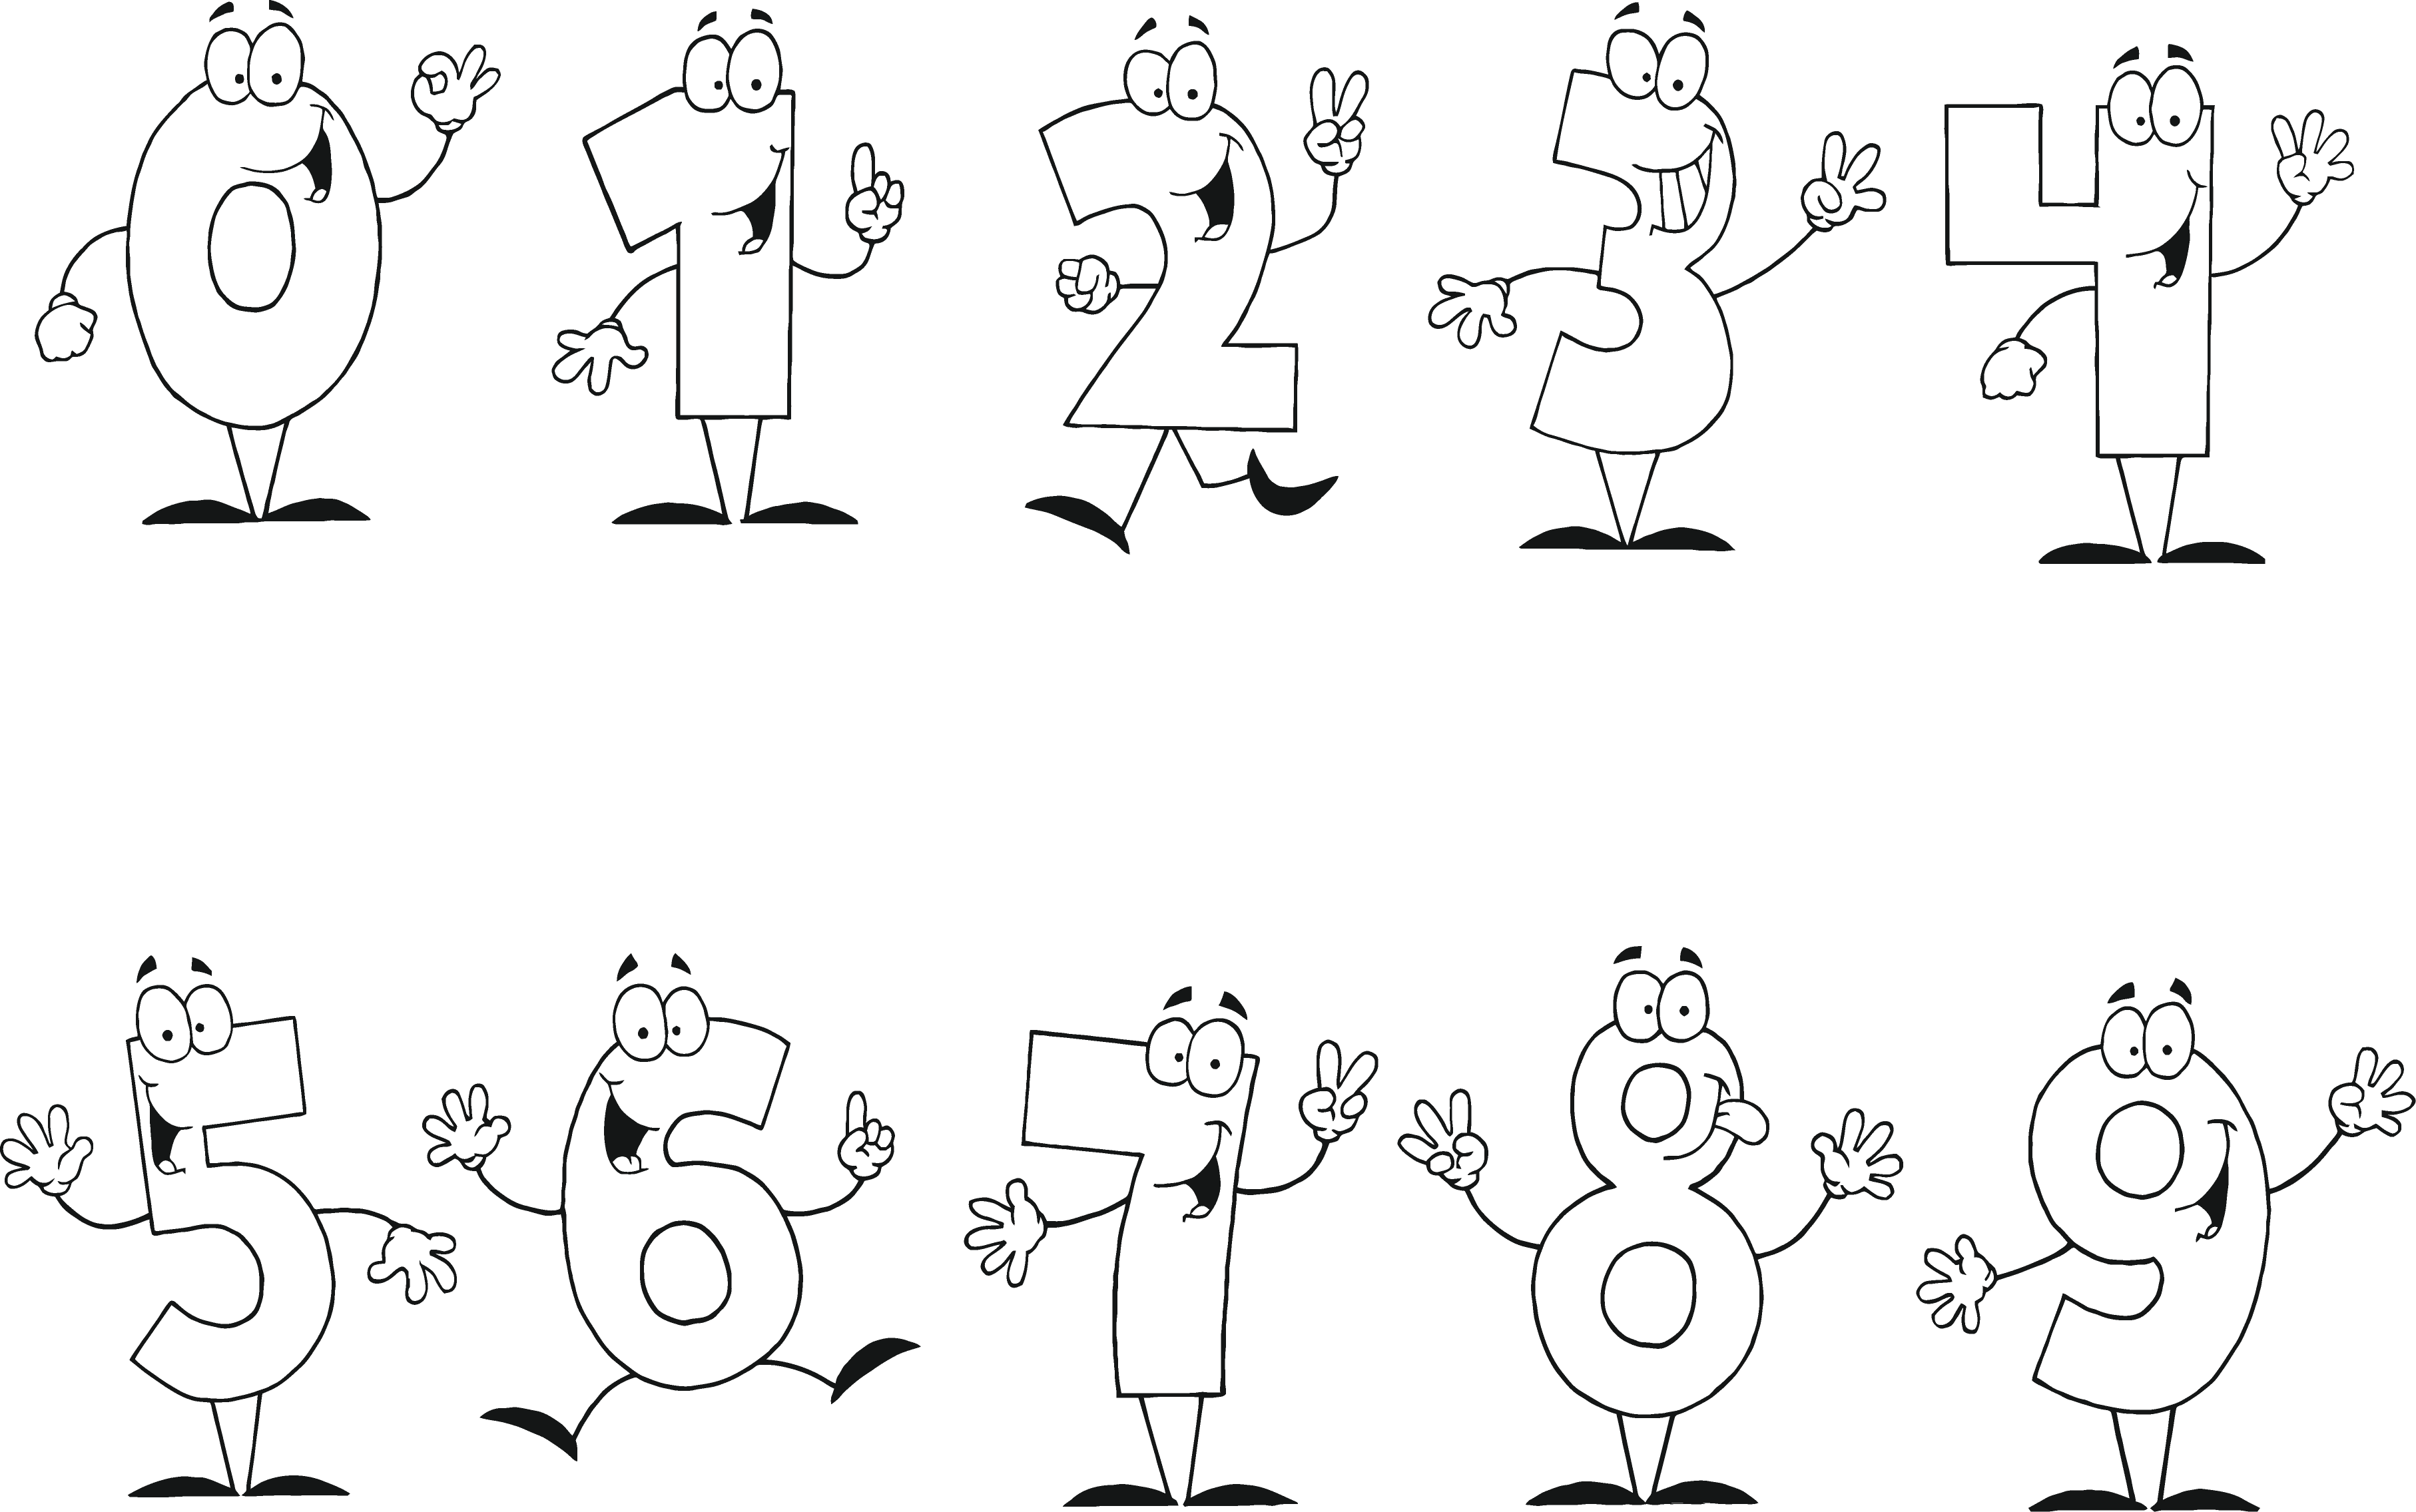 coloring-page-numbers-125118-educational-printable-coloring-pages